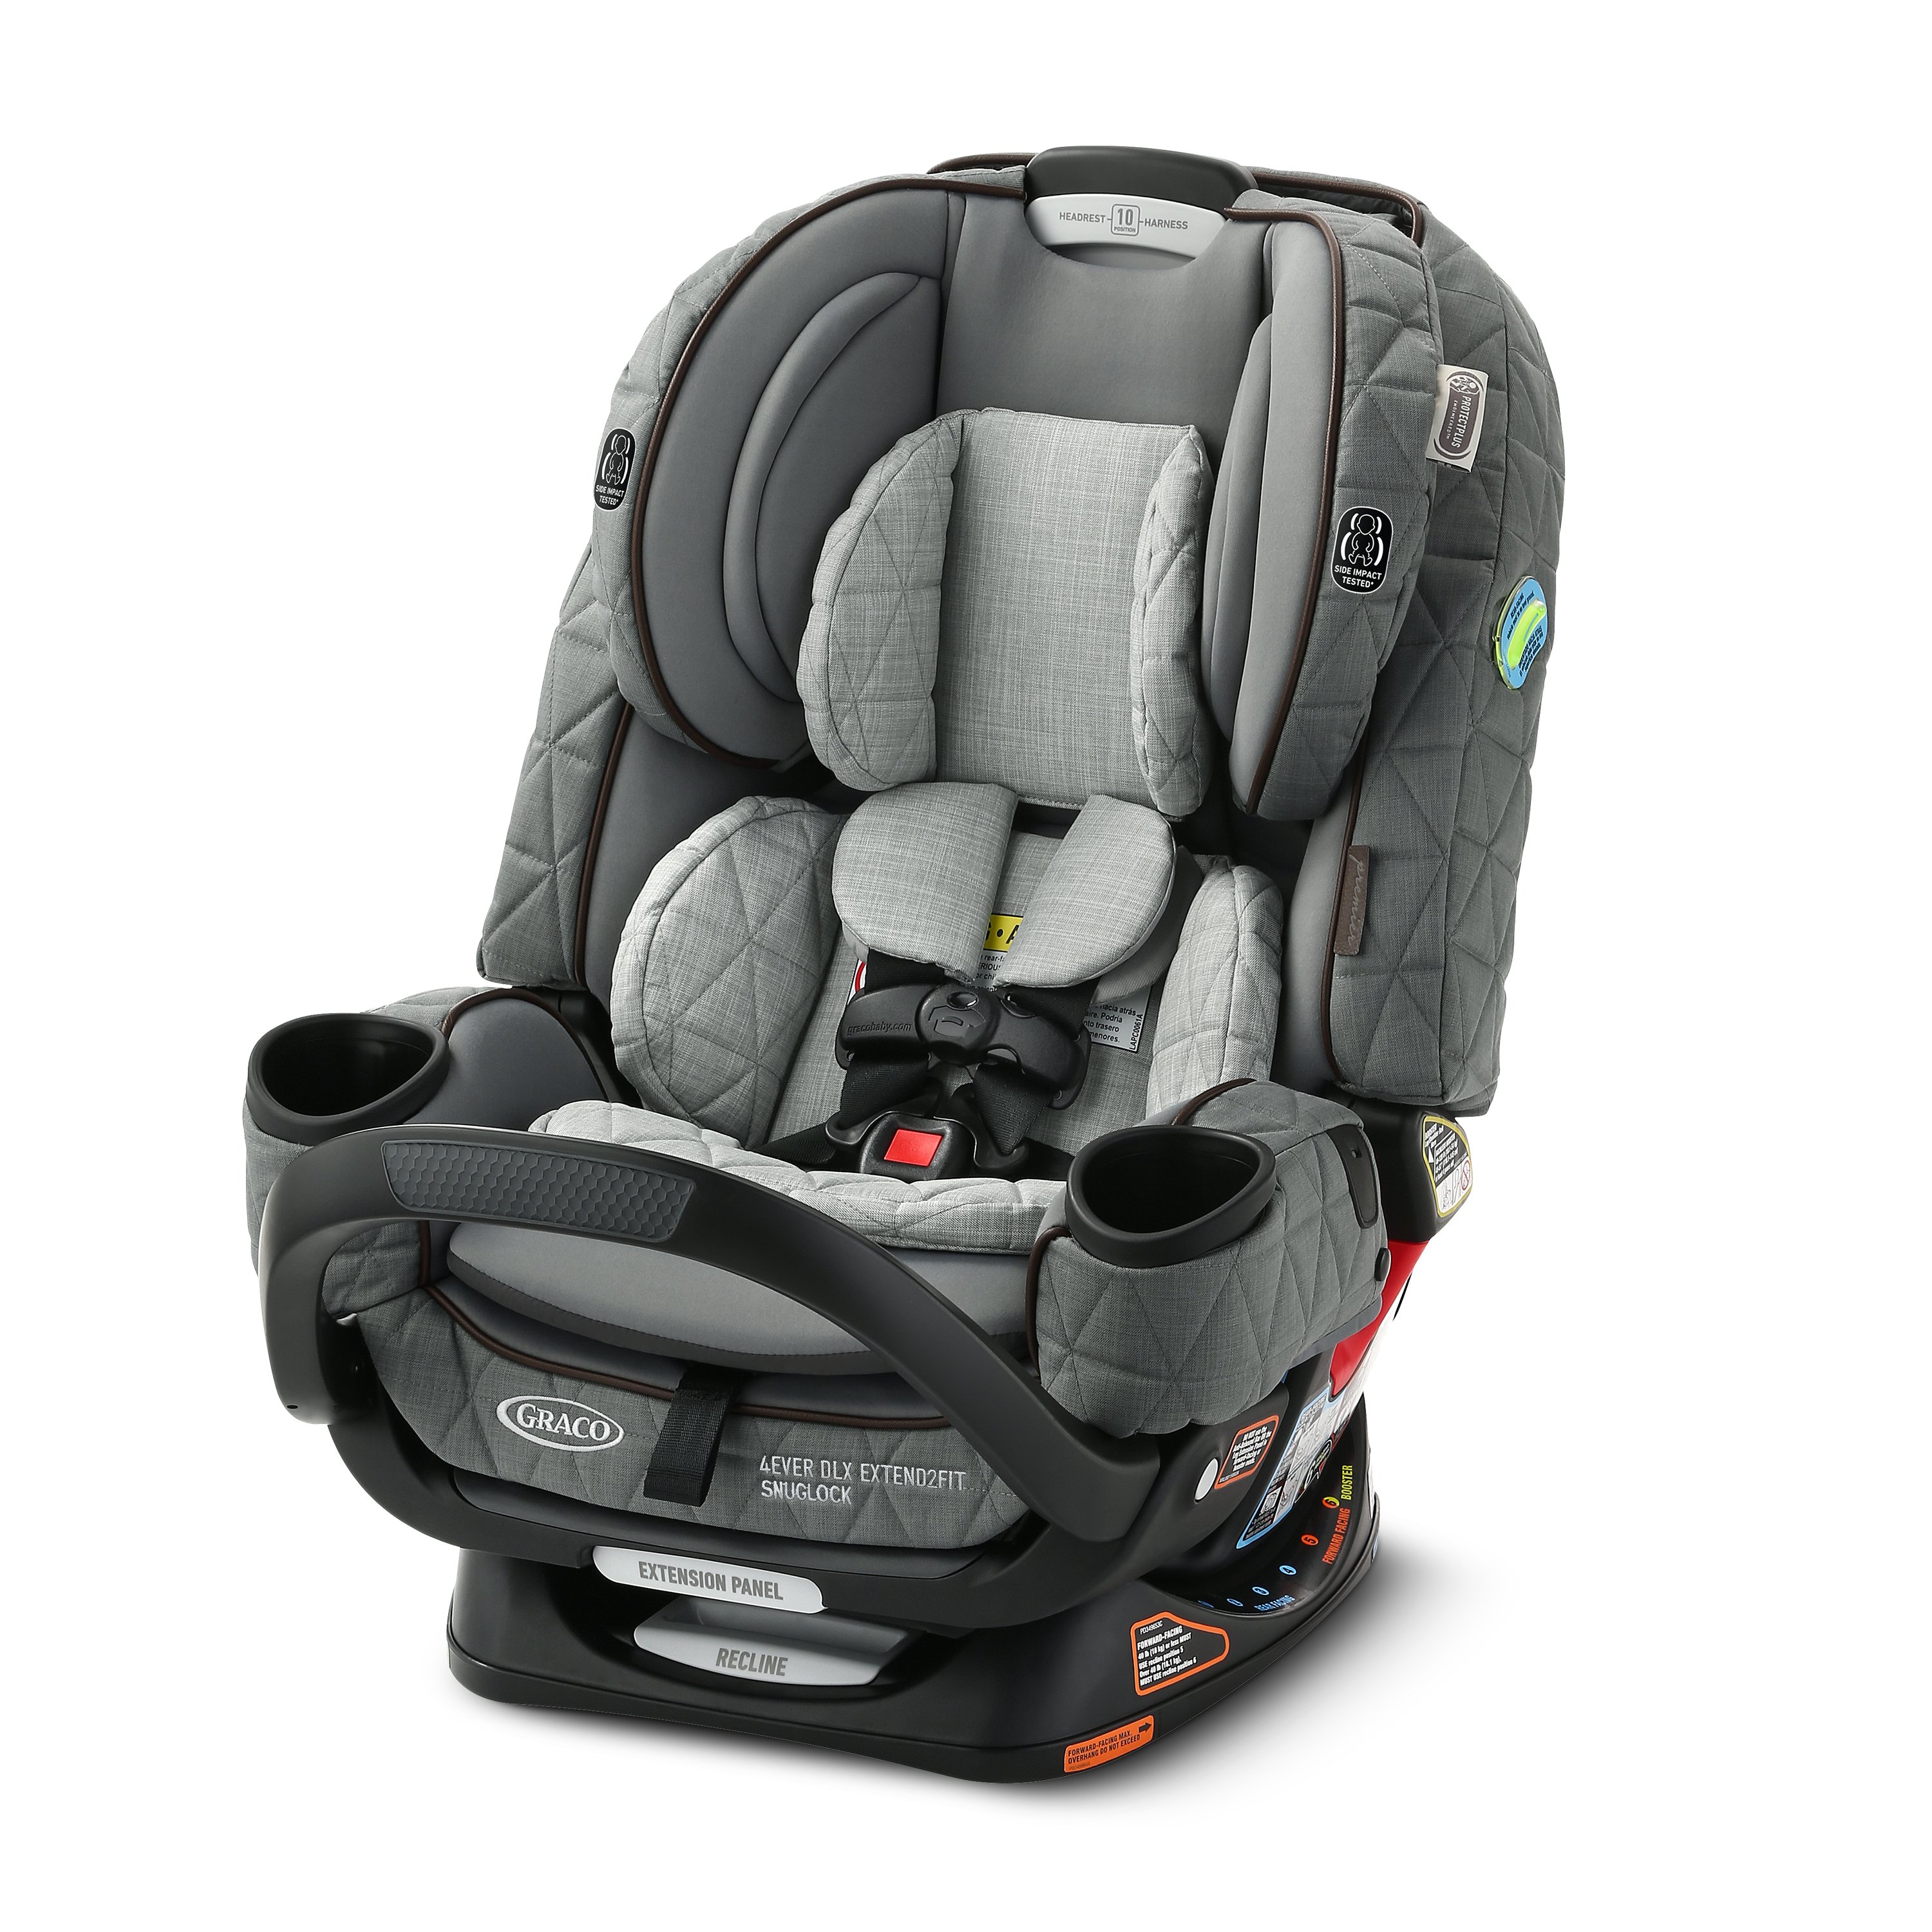 Comfy Padded Car Seat Cushion, Collections Etc.